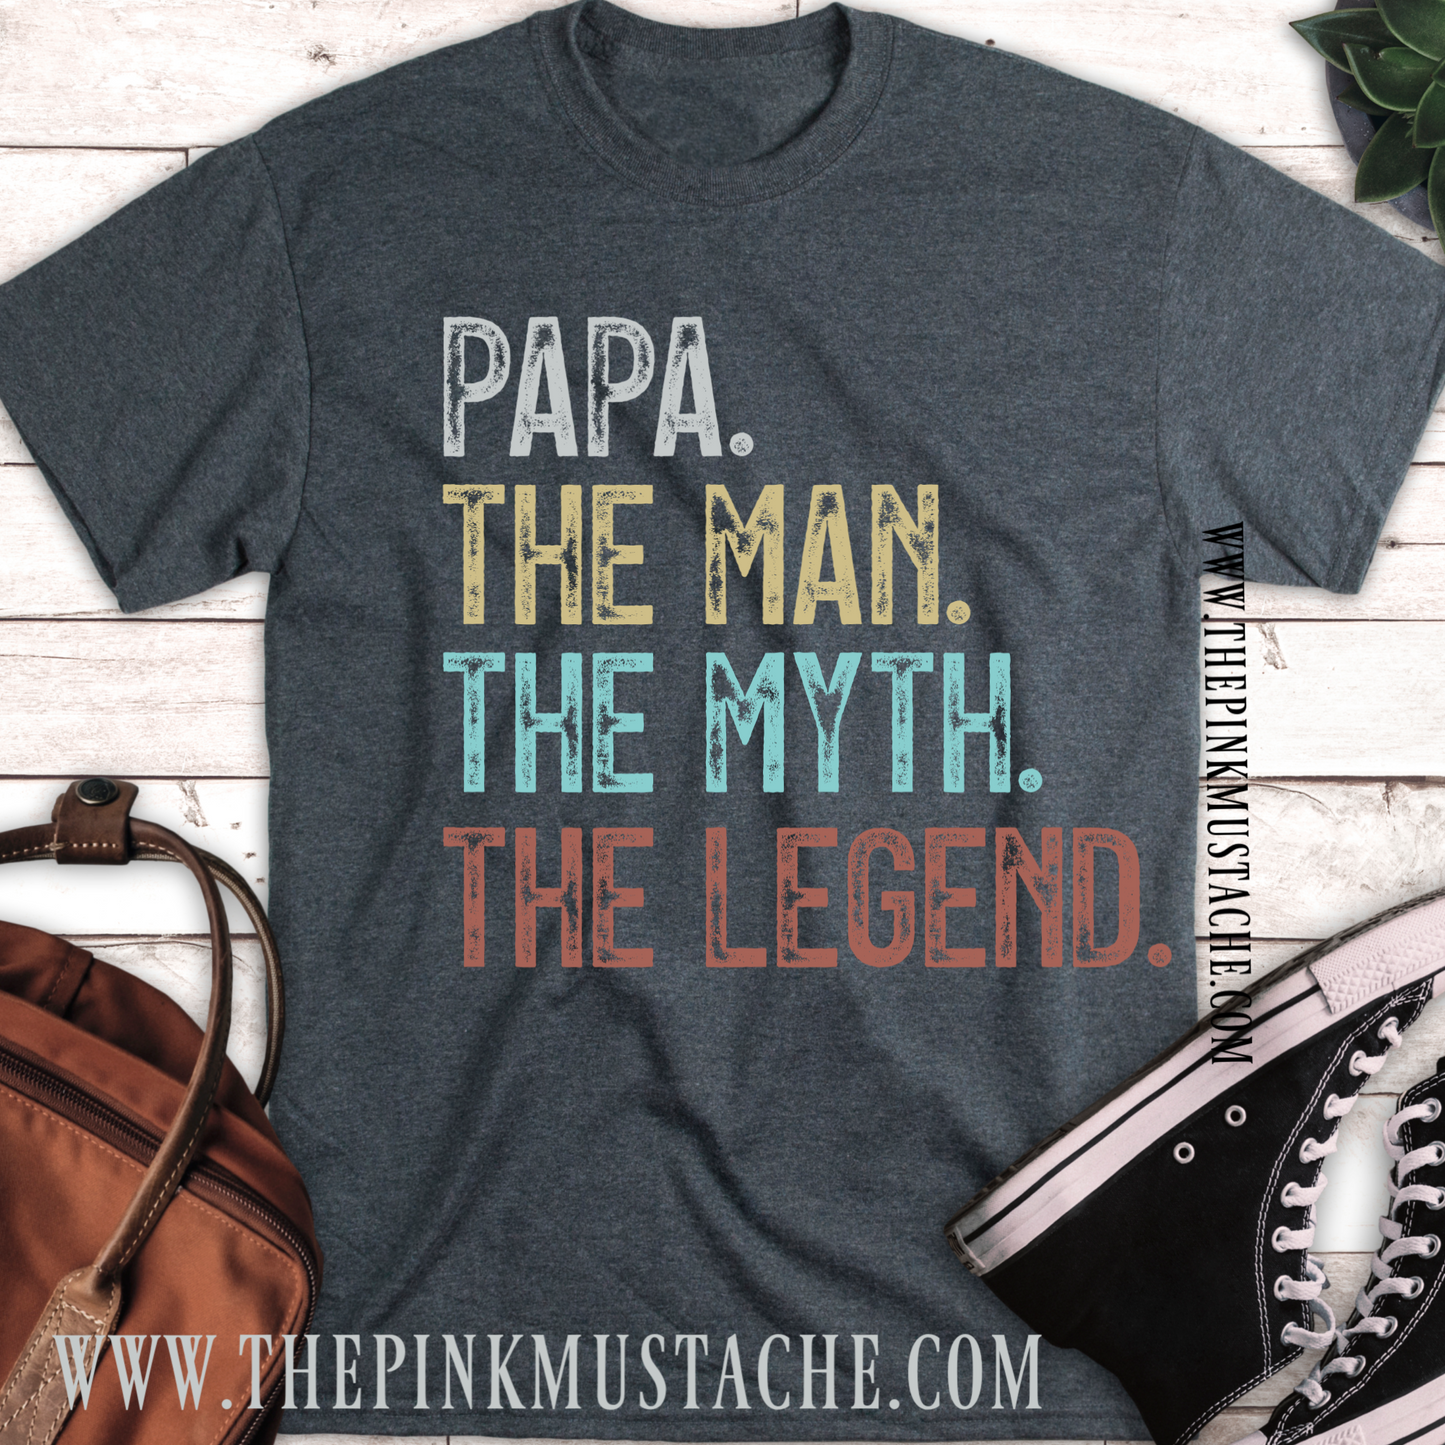 Father's Day Shirt / Daddy , The Man, The Myth, The Legend